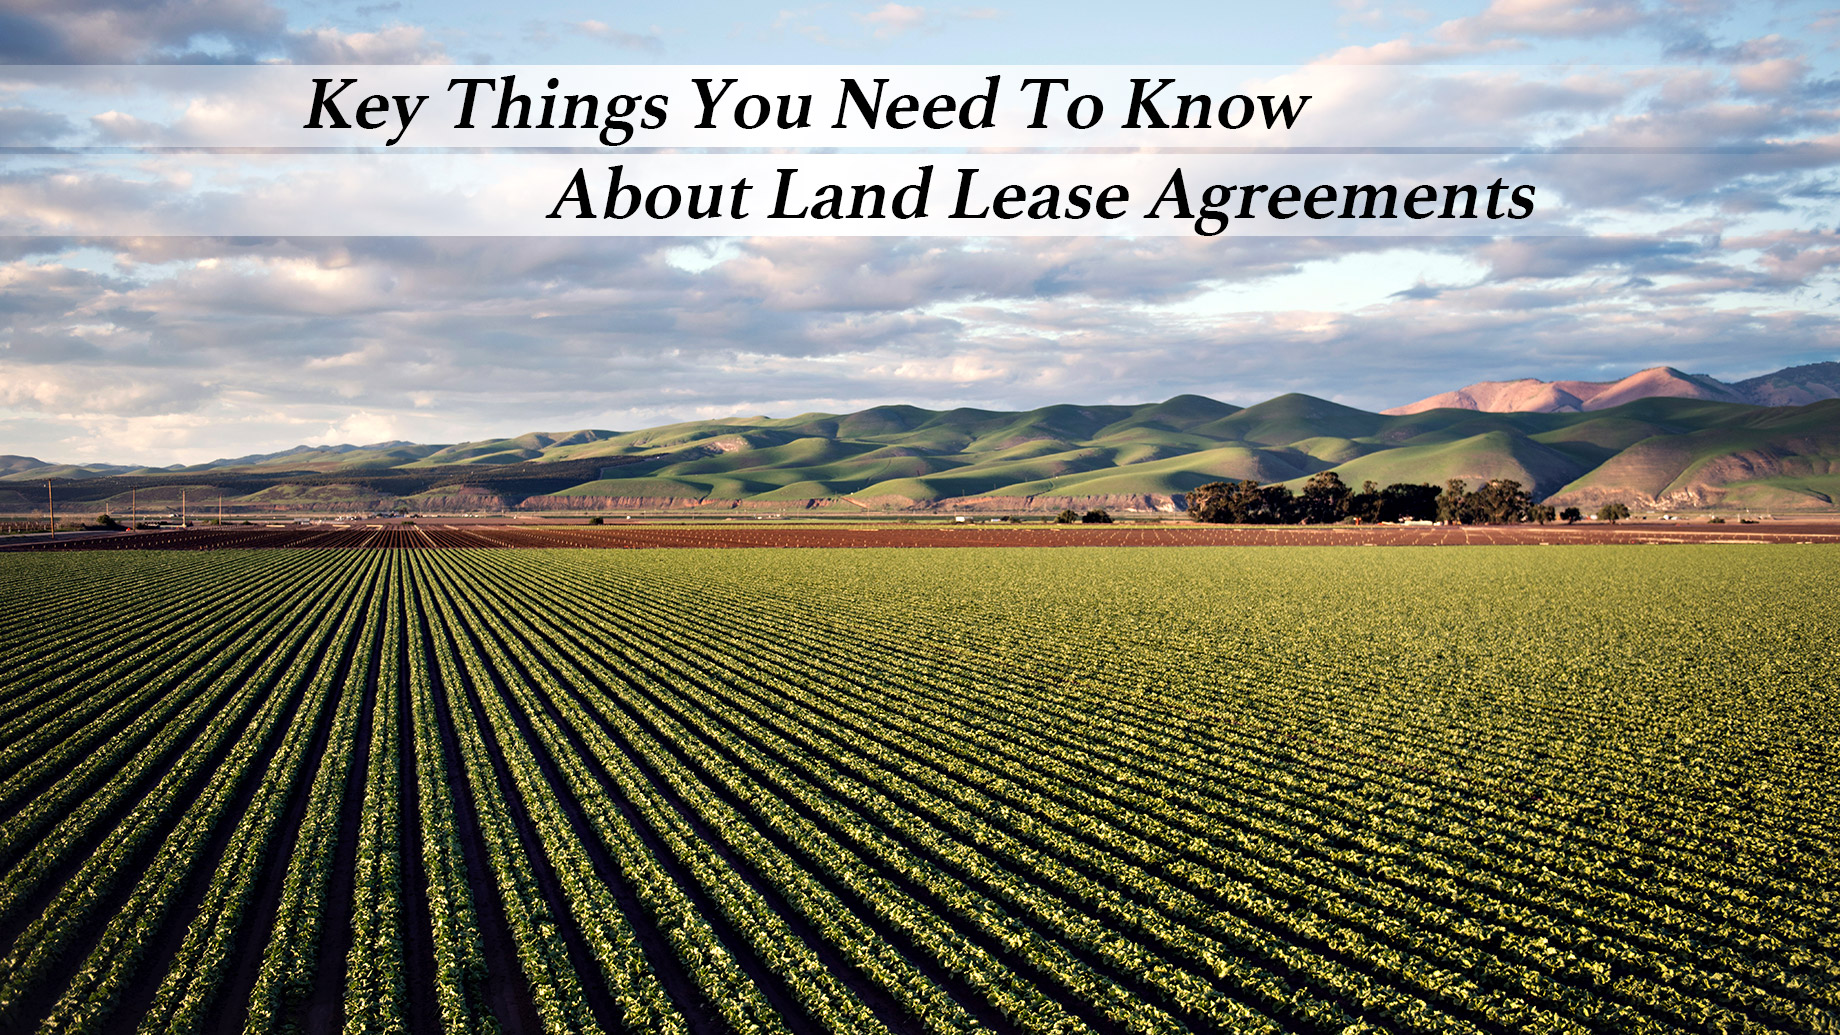 Key Things You Need To Know About Land Lease Agreements